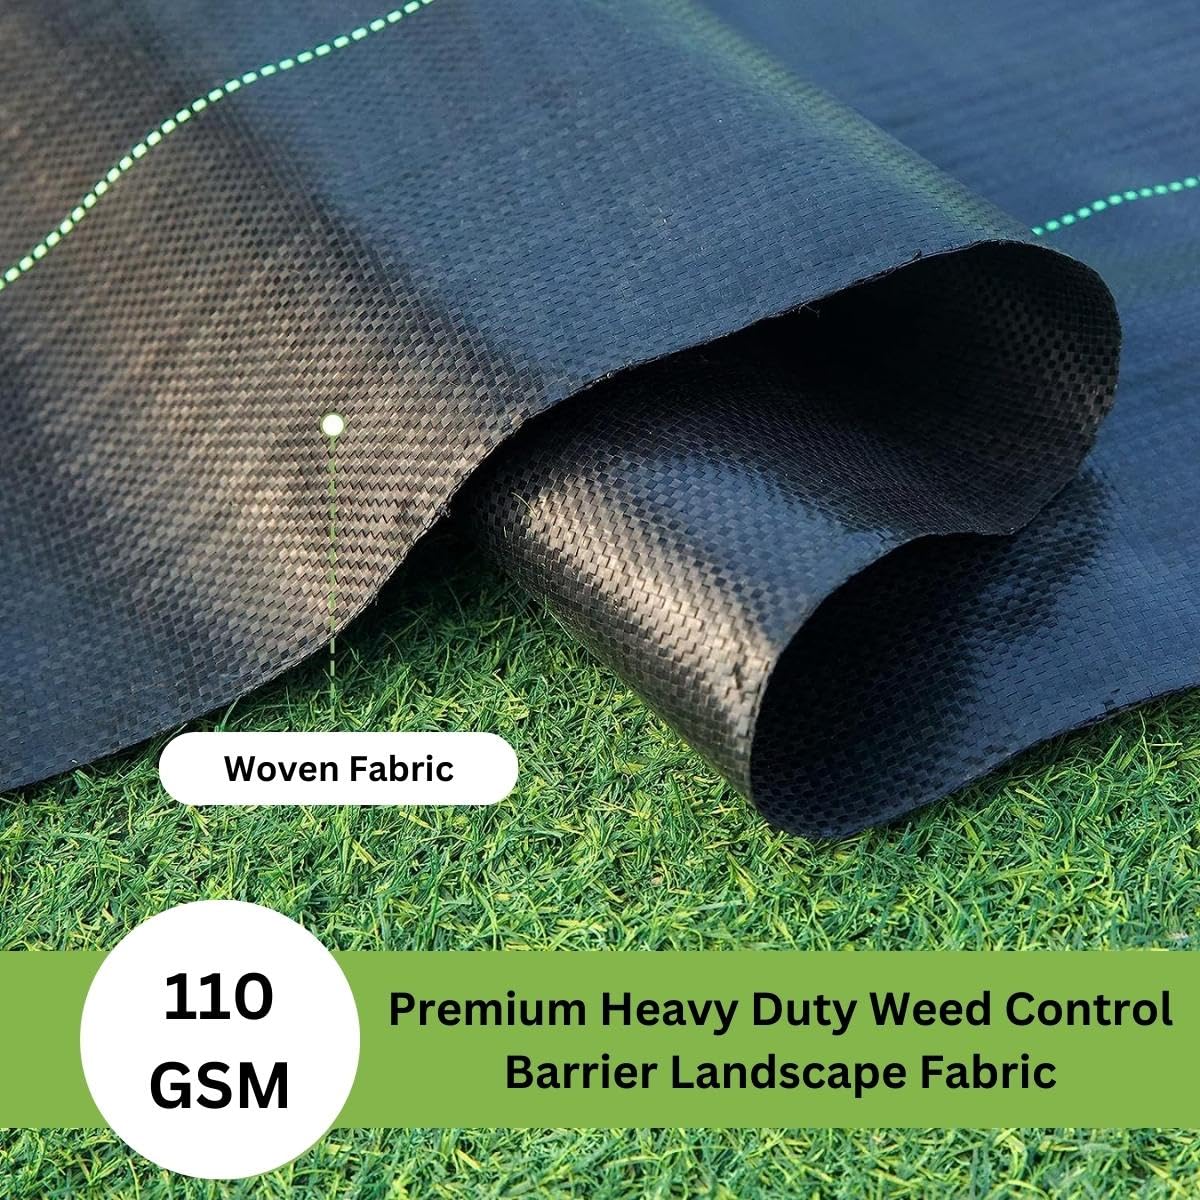 Singhal Premium Garden Weed Control Barrier Sheet Mat 2 Mtr x 100 Mtr, Landscape Fabric 110 GSM Heavy Duty Weed Block Gardening Mat for Gardens, Agriculture, Outdoor Projects (Black)